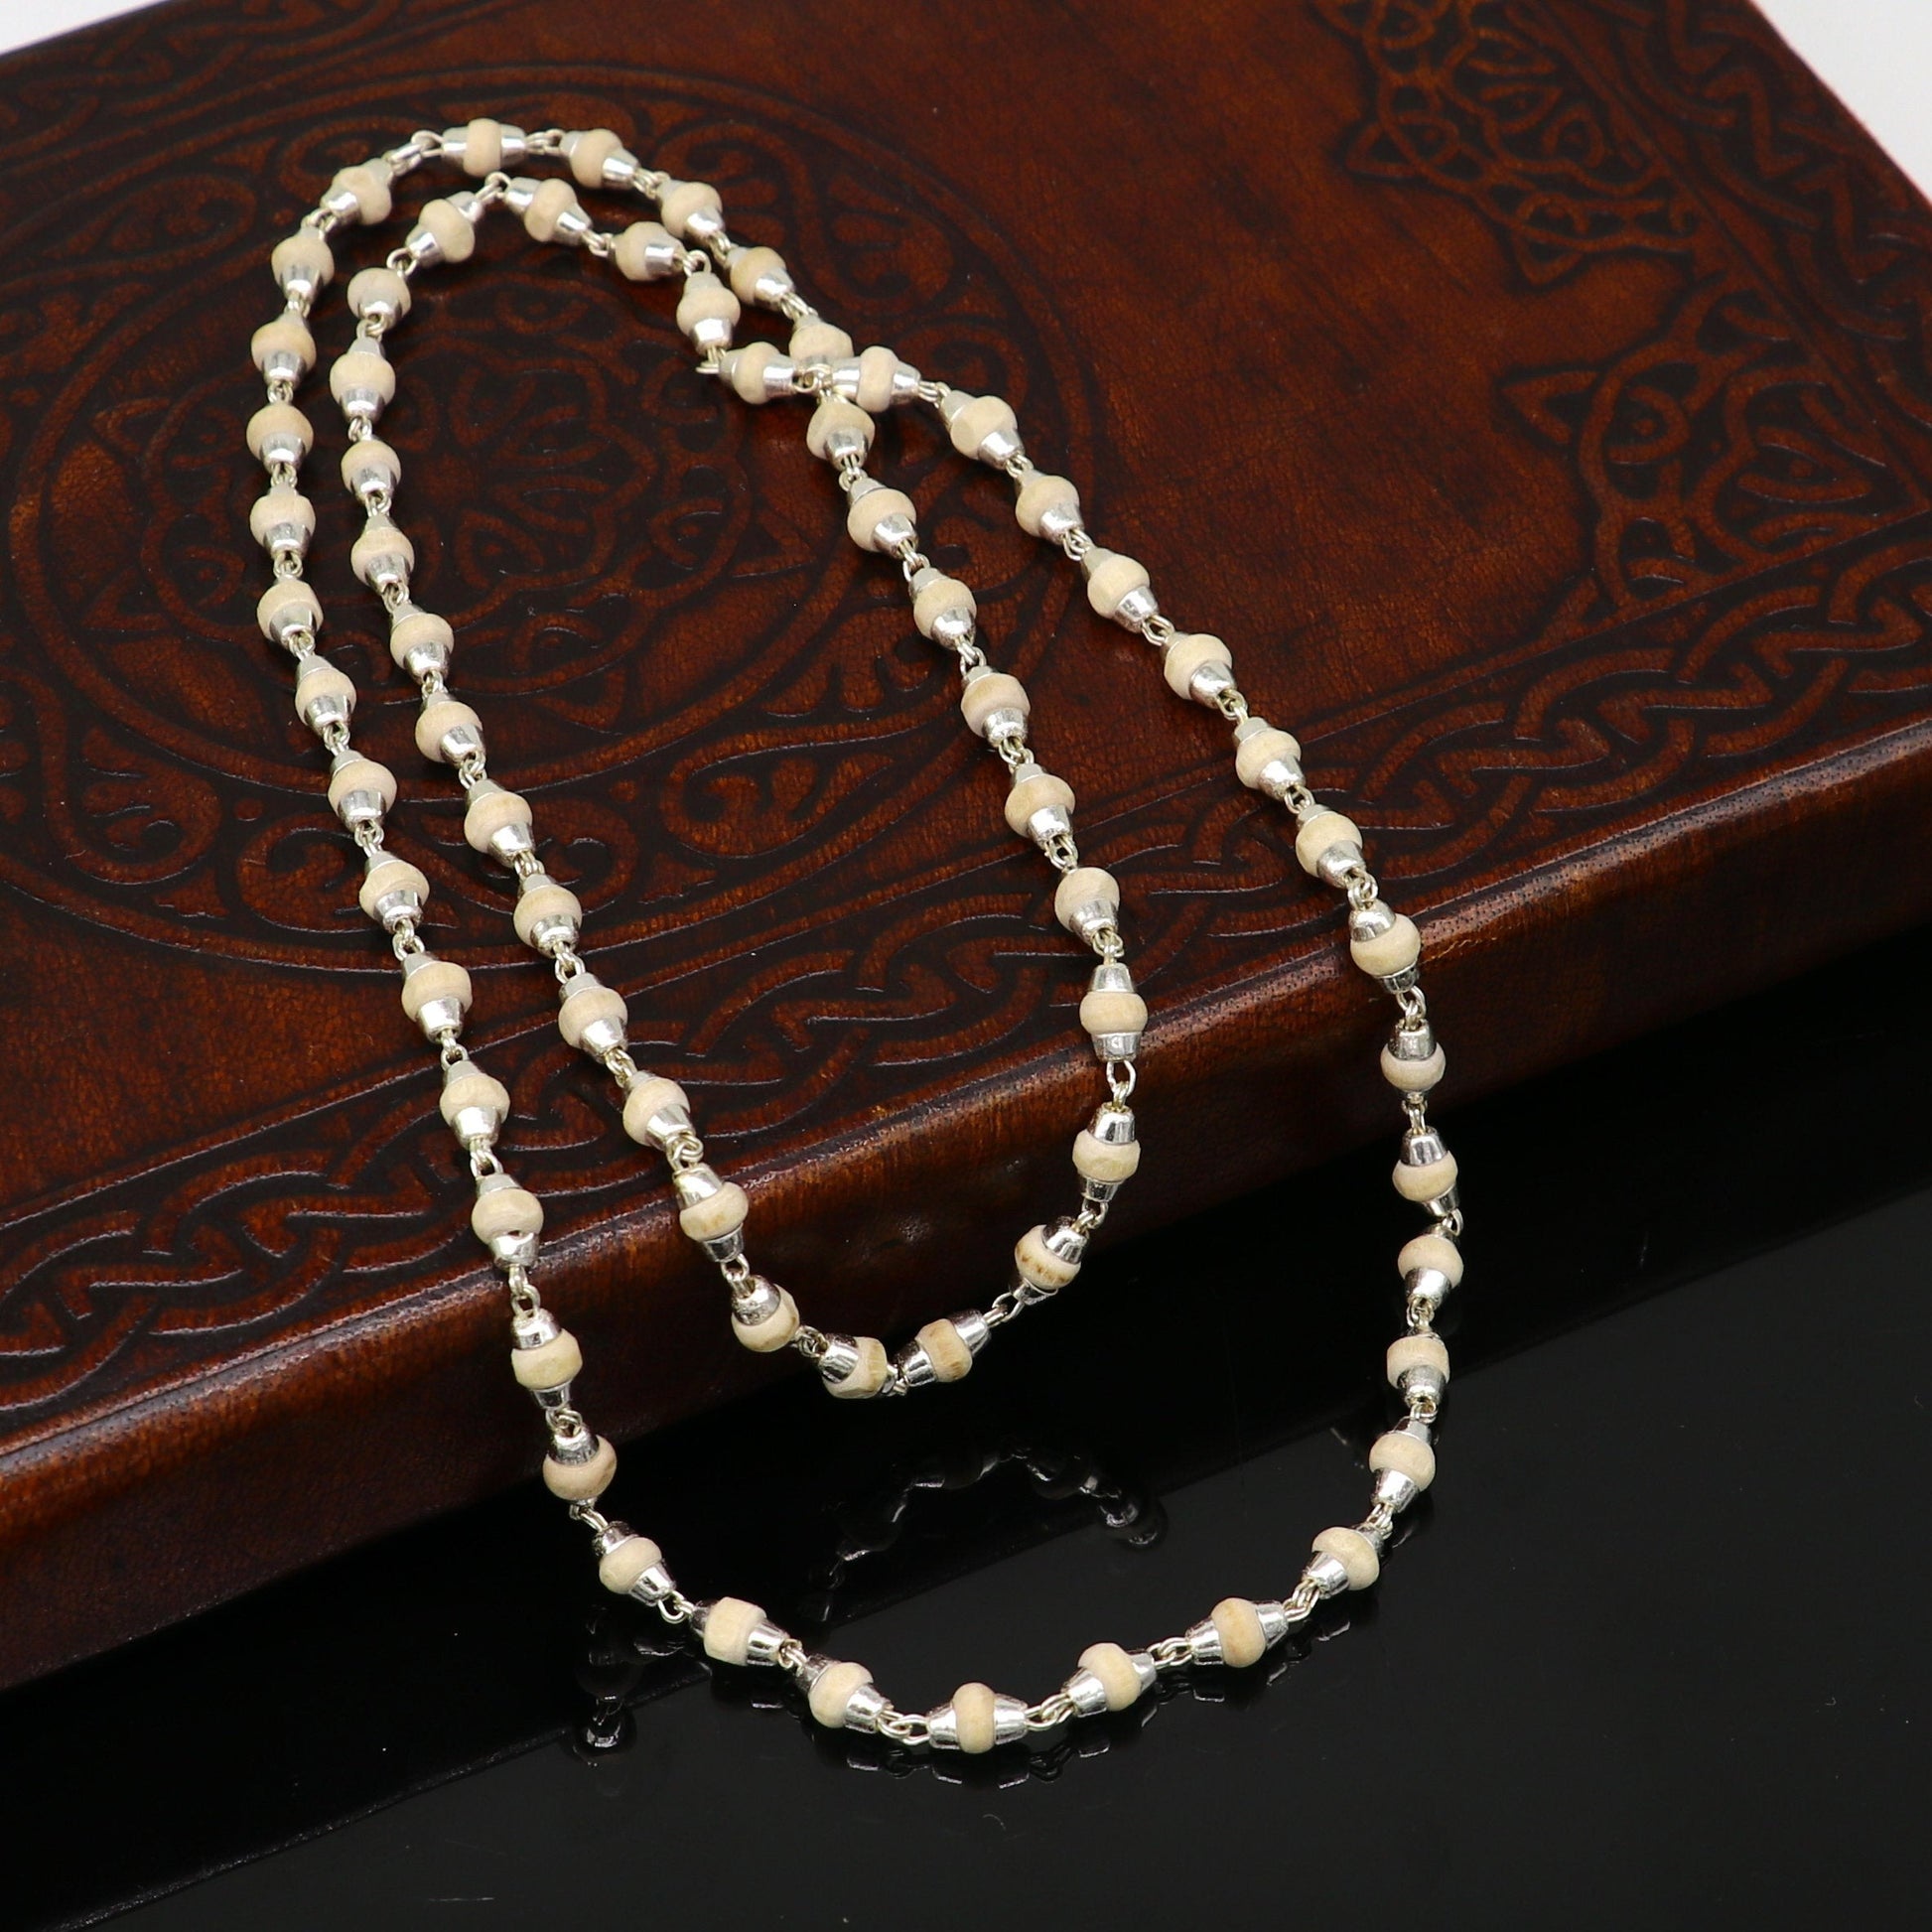 925 sterling silver customized basil rosary wooden beads solid chain necklace, excellent 24" unisex stylish necklace from india ch103 - TRIBAL ORNAMENTS